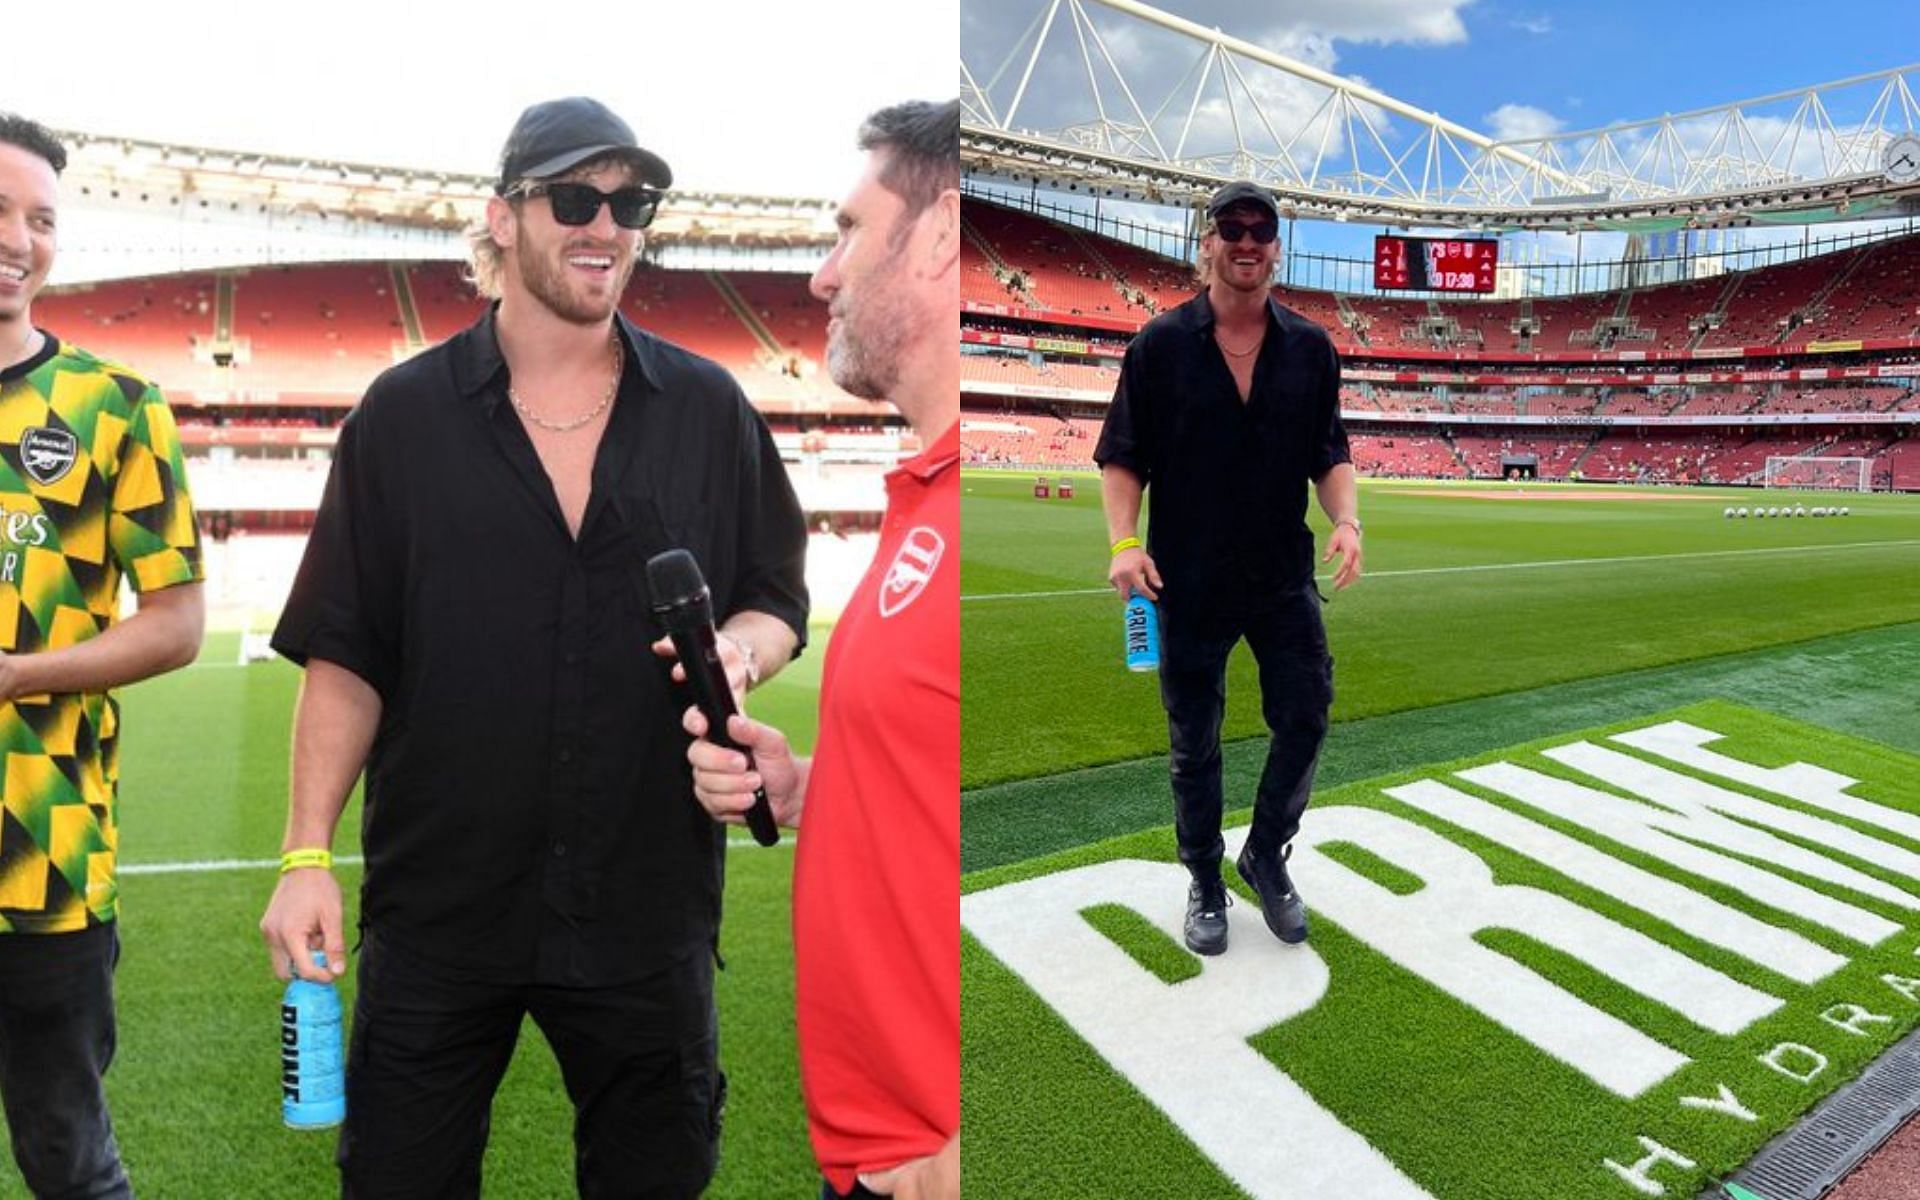 Logan Paul getting interviewed at the Emirates Stadium (left) and Logan Paul standing next to the Prime logo at the Emirates (right) (Image credits @loganpaul and @arsenal on Twitter)